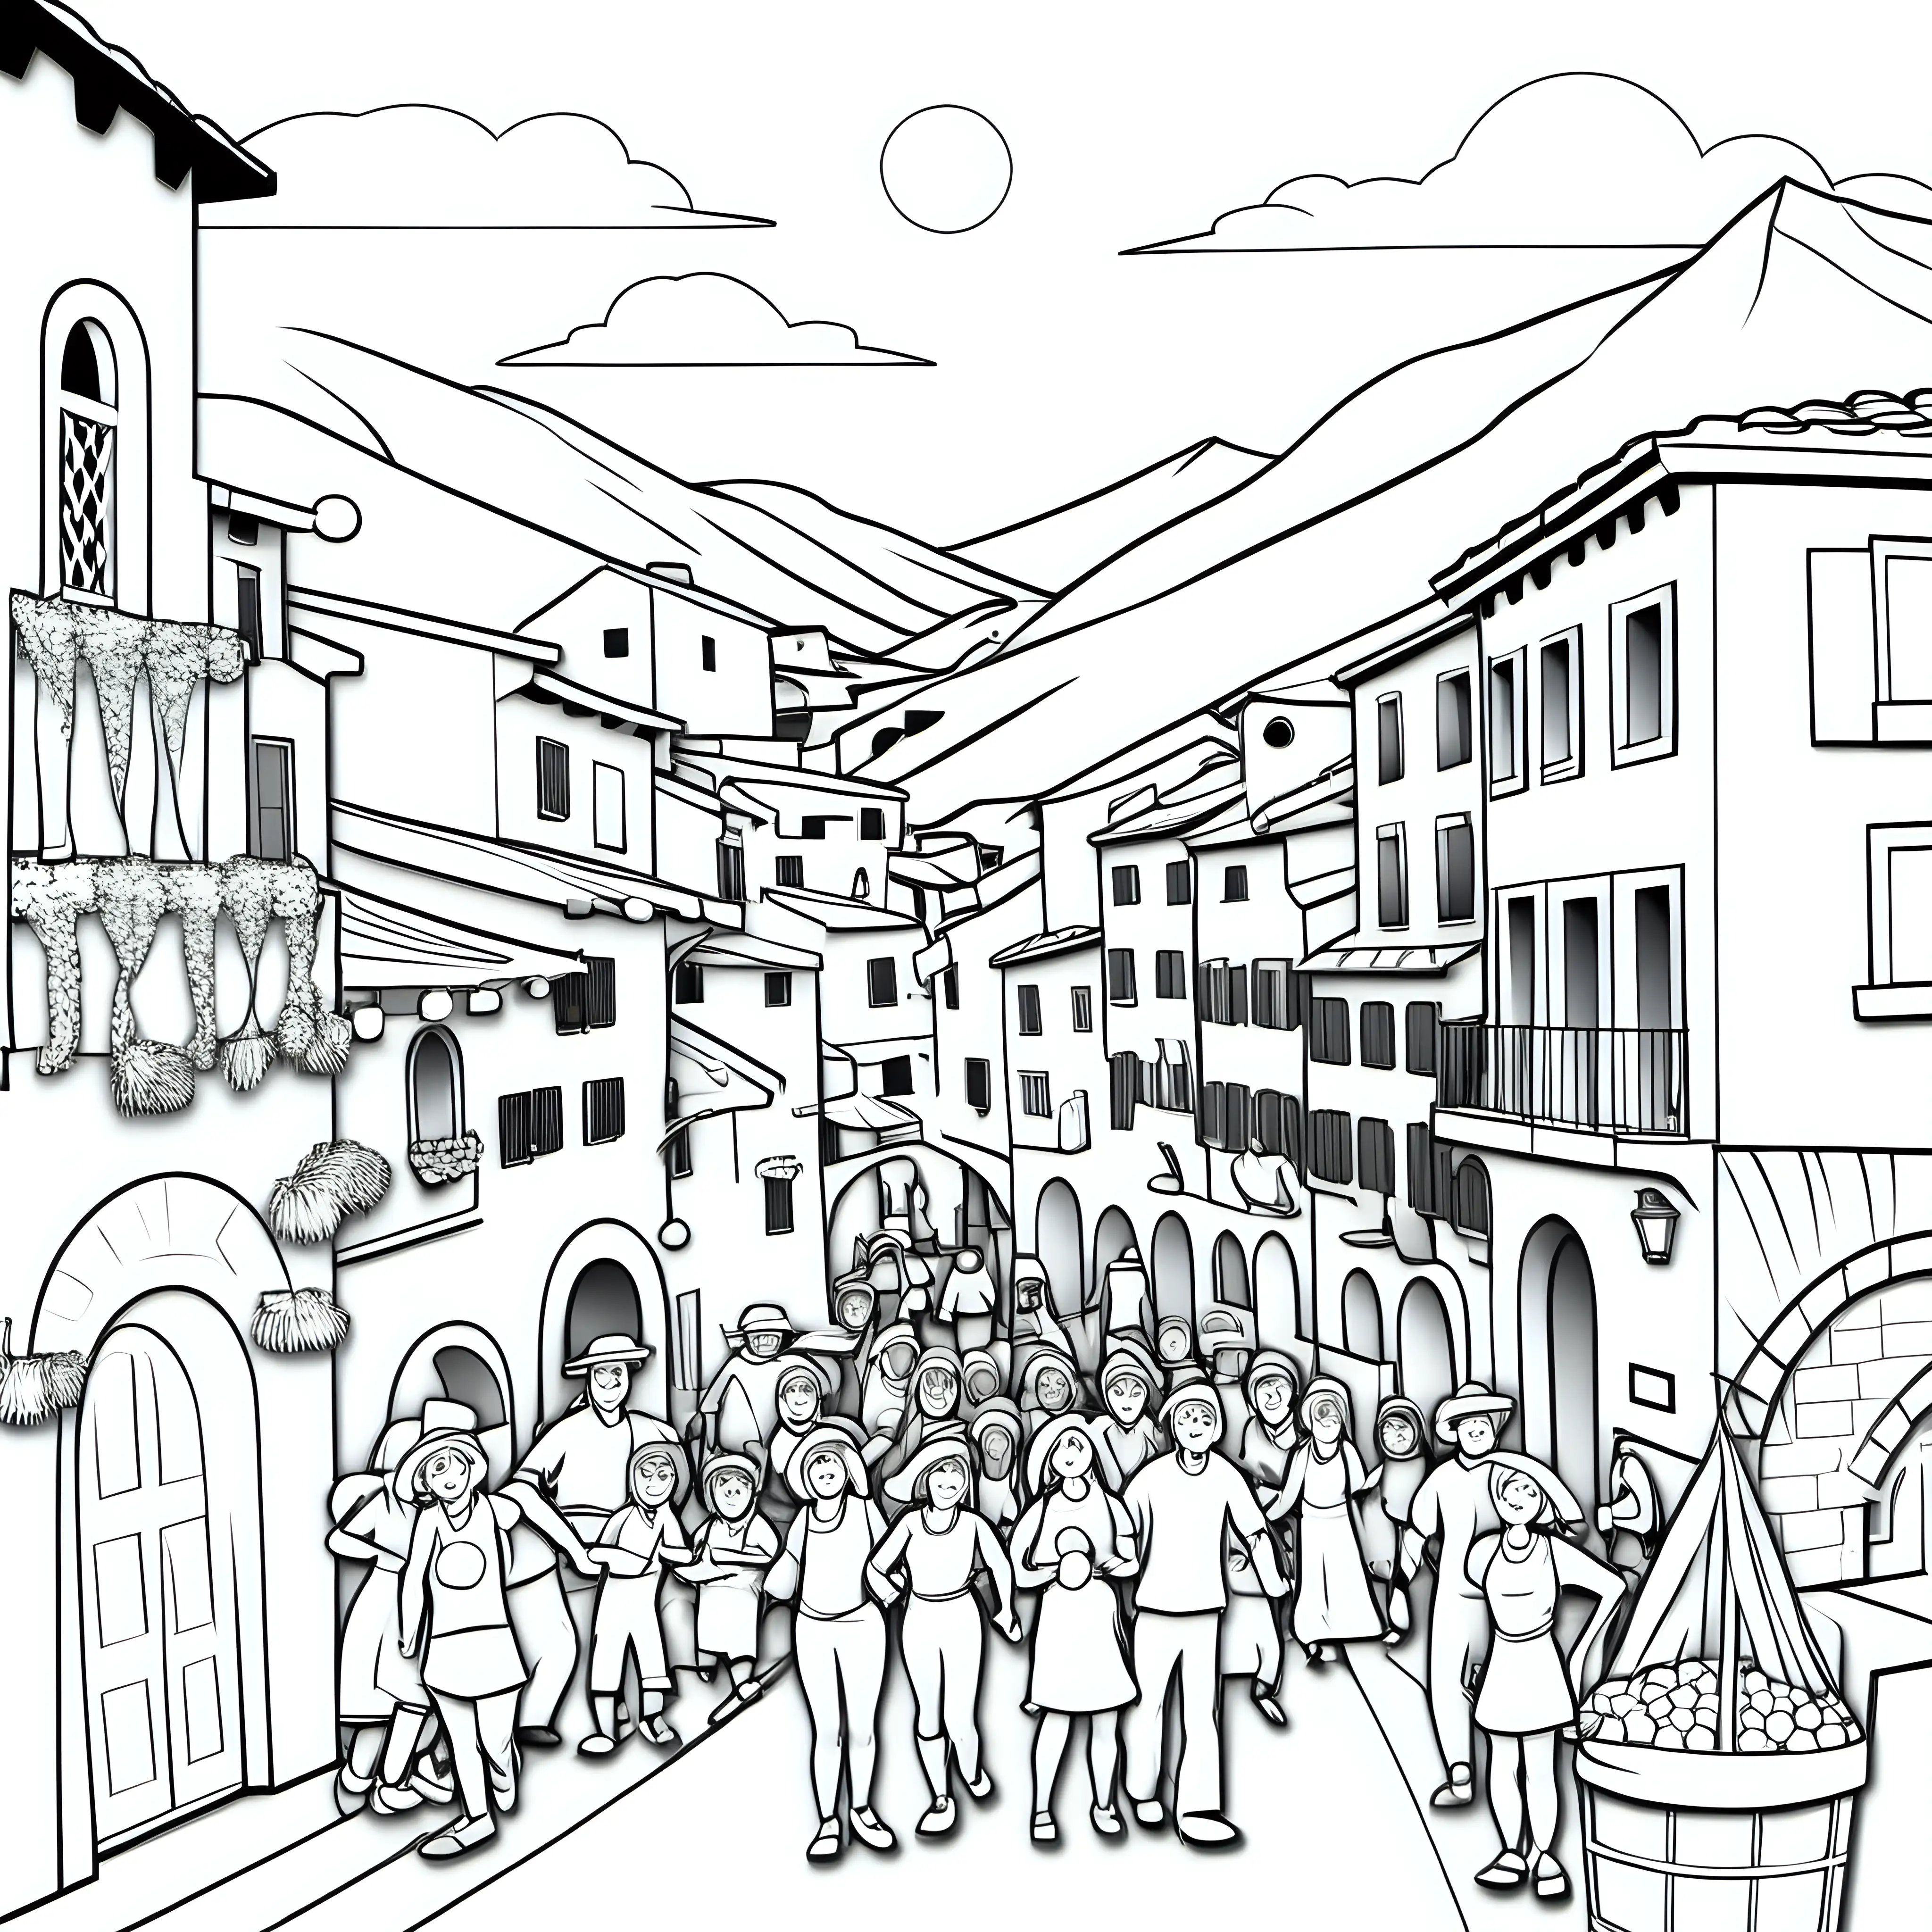 Vibrant Italian Village Festival Coloring Page for All Ages